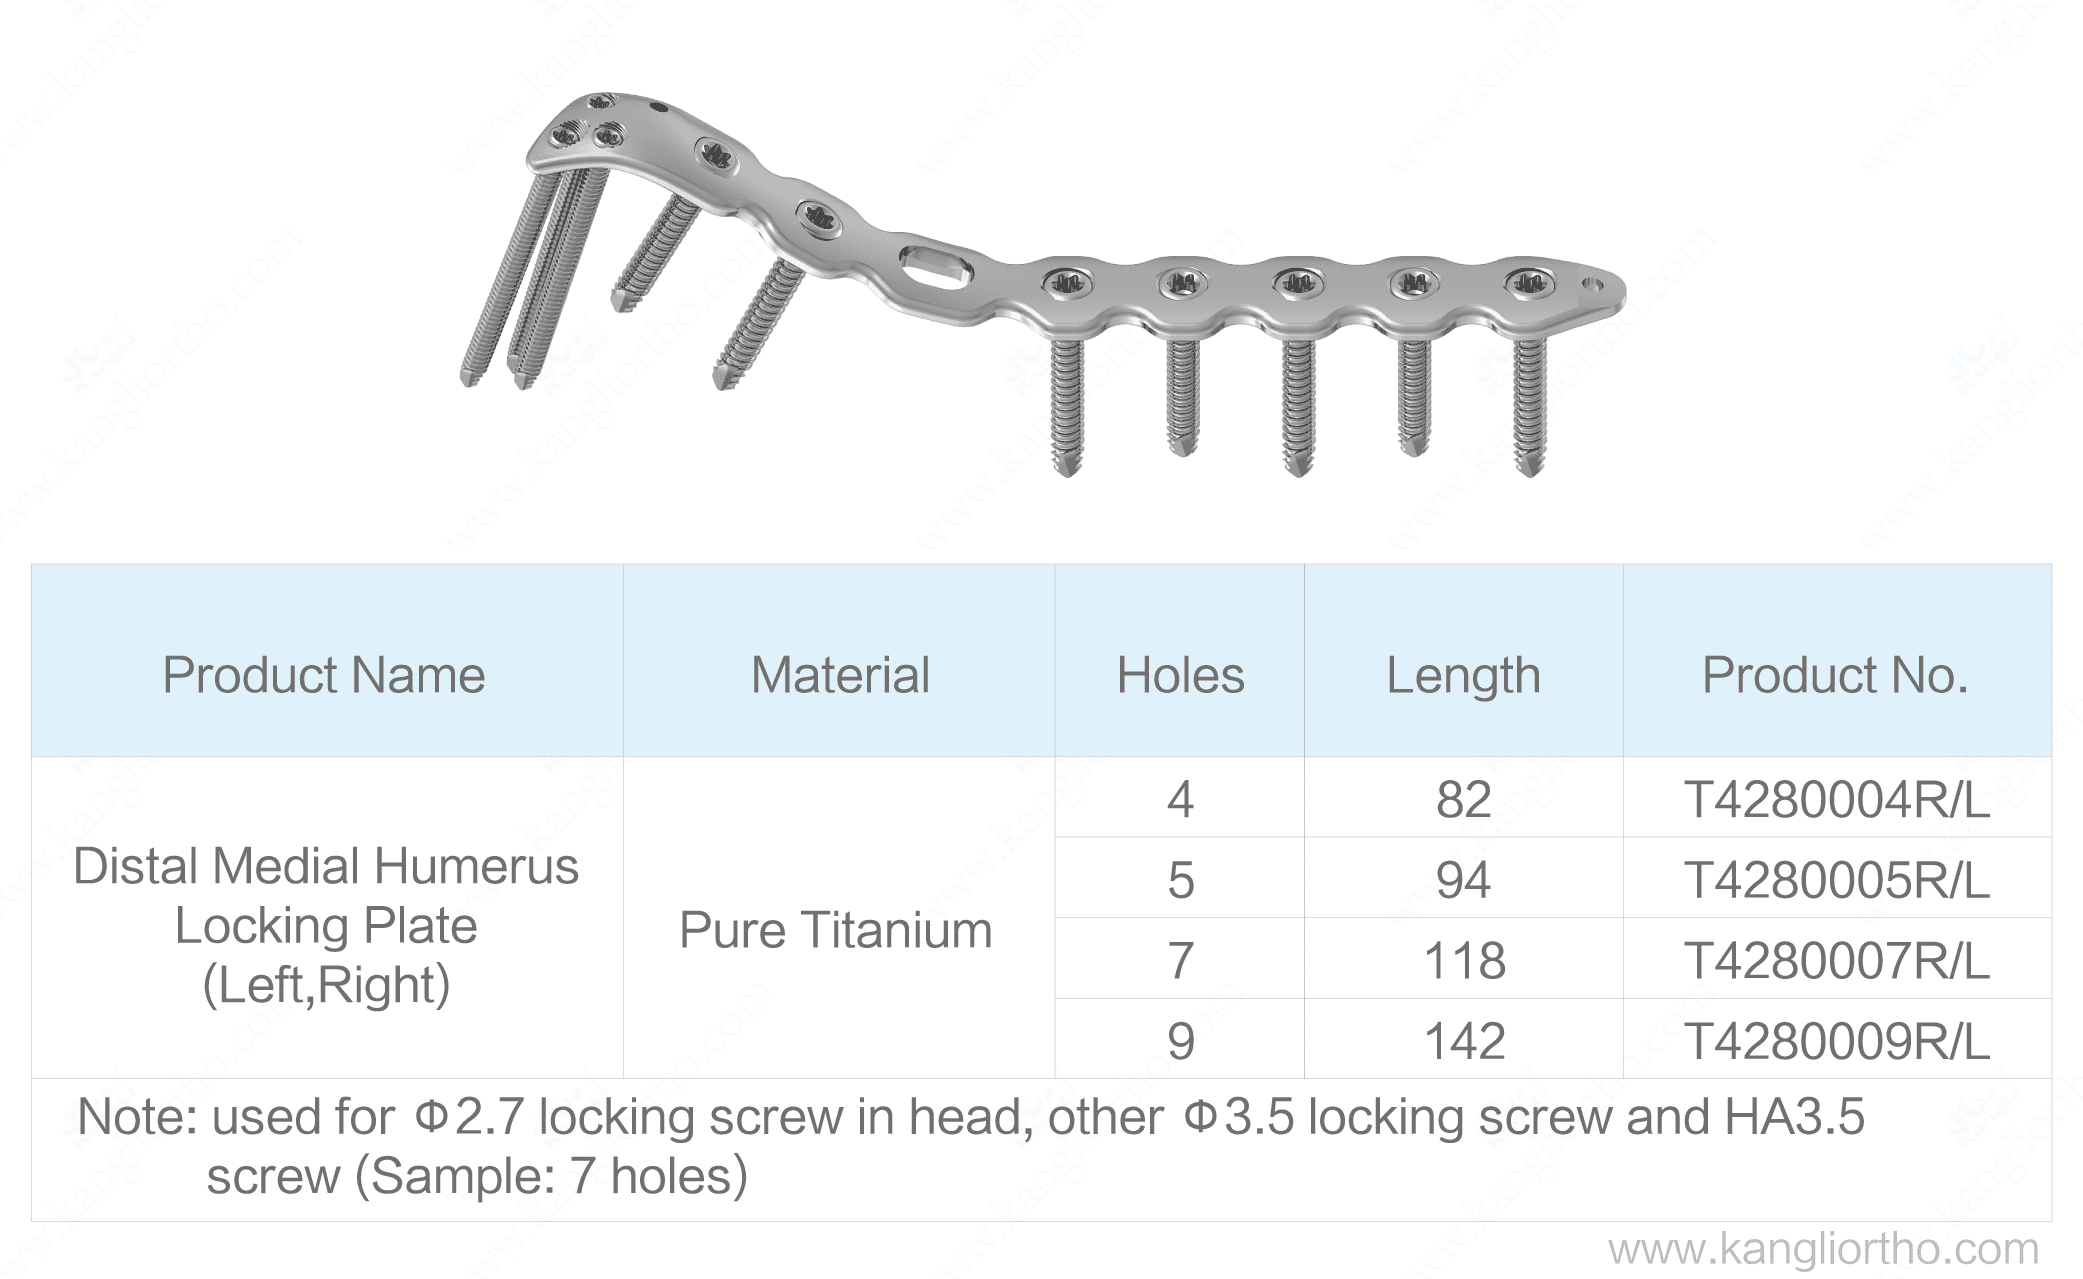 distal-medial-humerus-locking-plate-specifications